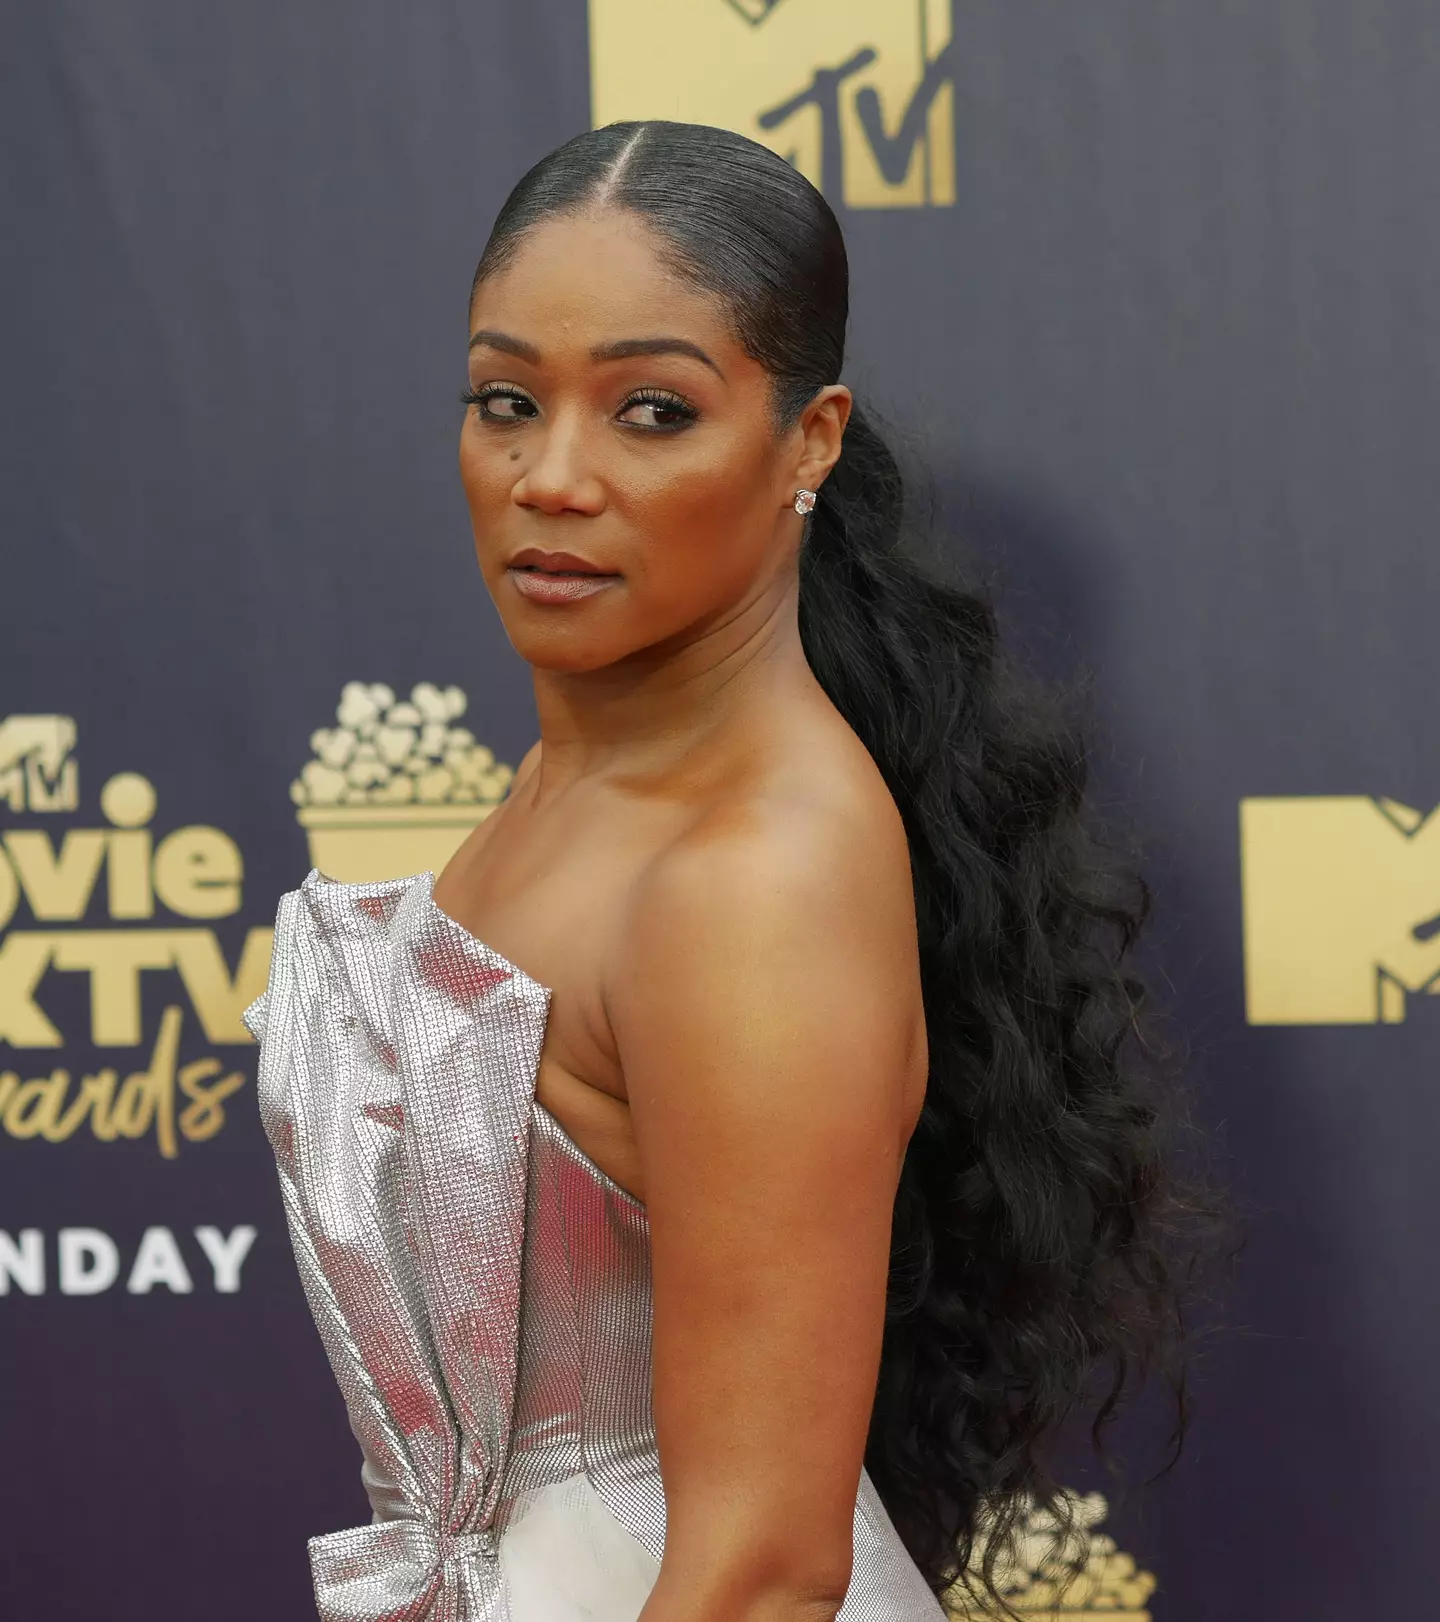 Tiffany Haddish and Aries Spears are being sued by a woman over sexual abuse claims.